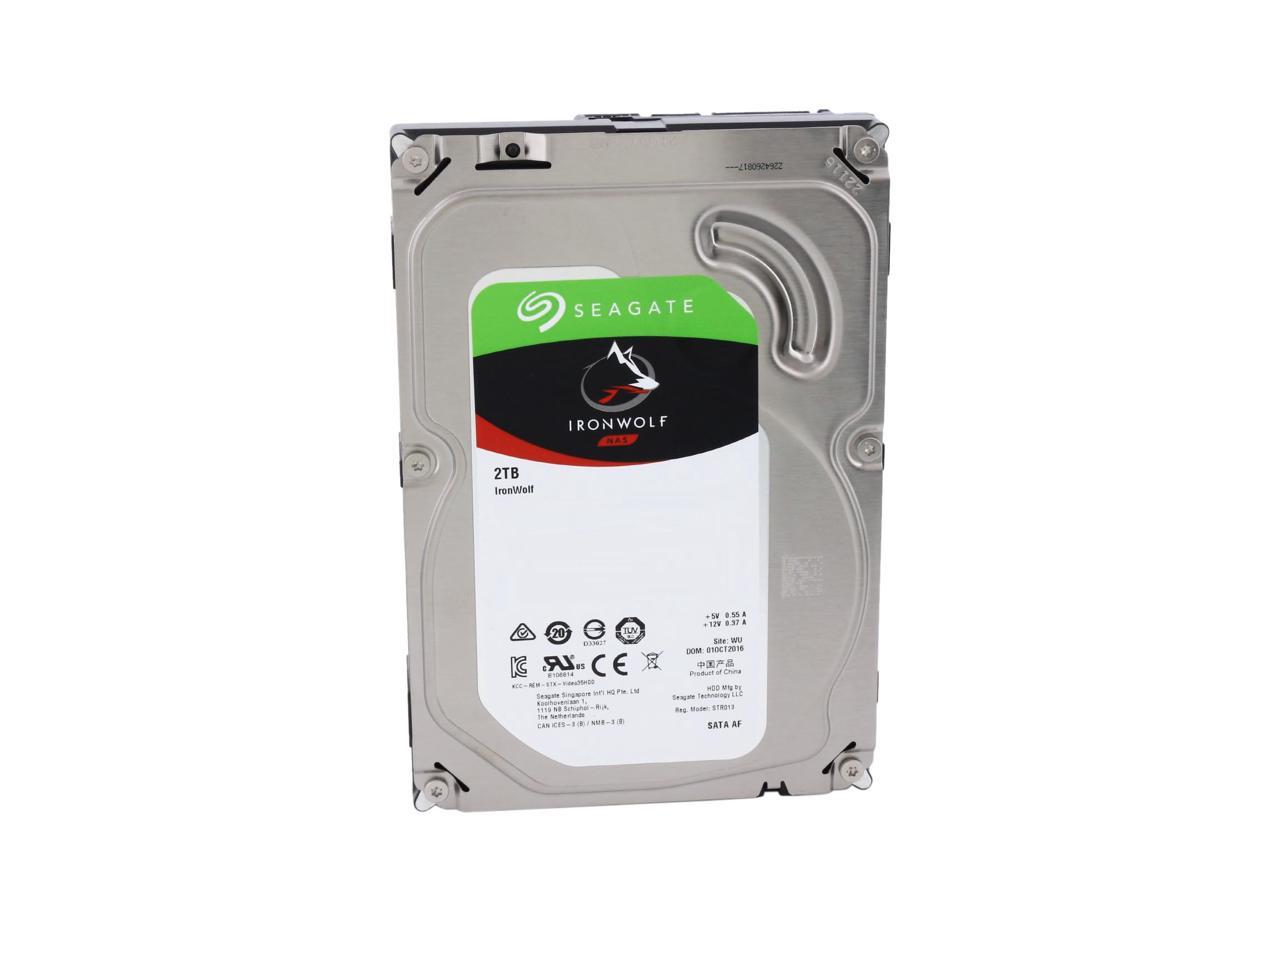 Seagate Ironwolf 2Tb Nas Hard Drive 5900 Rpm 64Mb Cache Sata 6.0Gb/S Cmr 3.5" Internal Hdd For Raid Network Attached Storage St2000Vn004